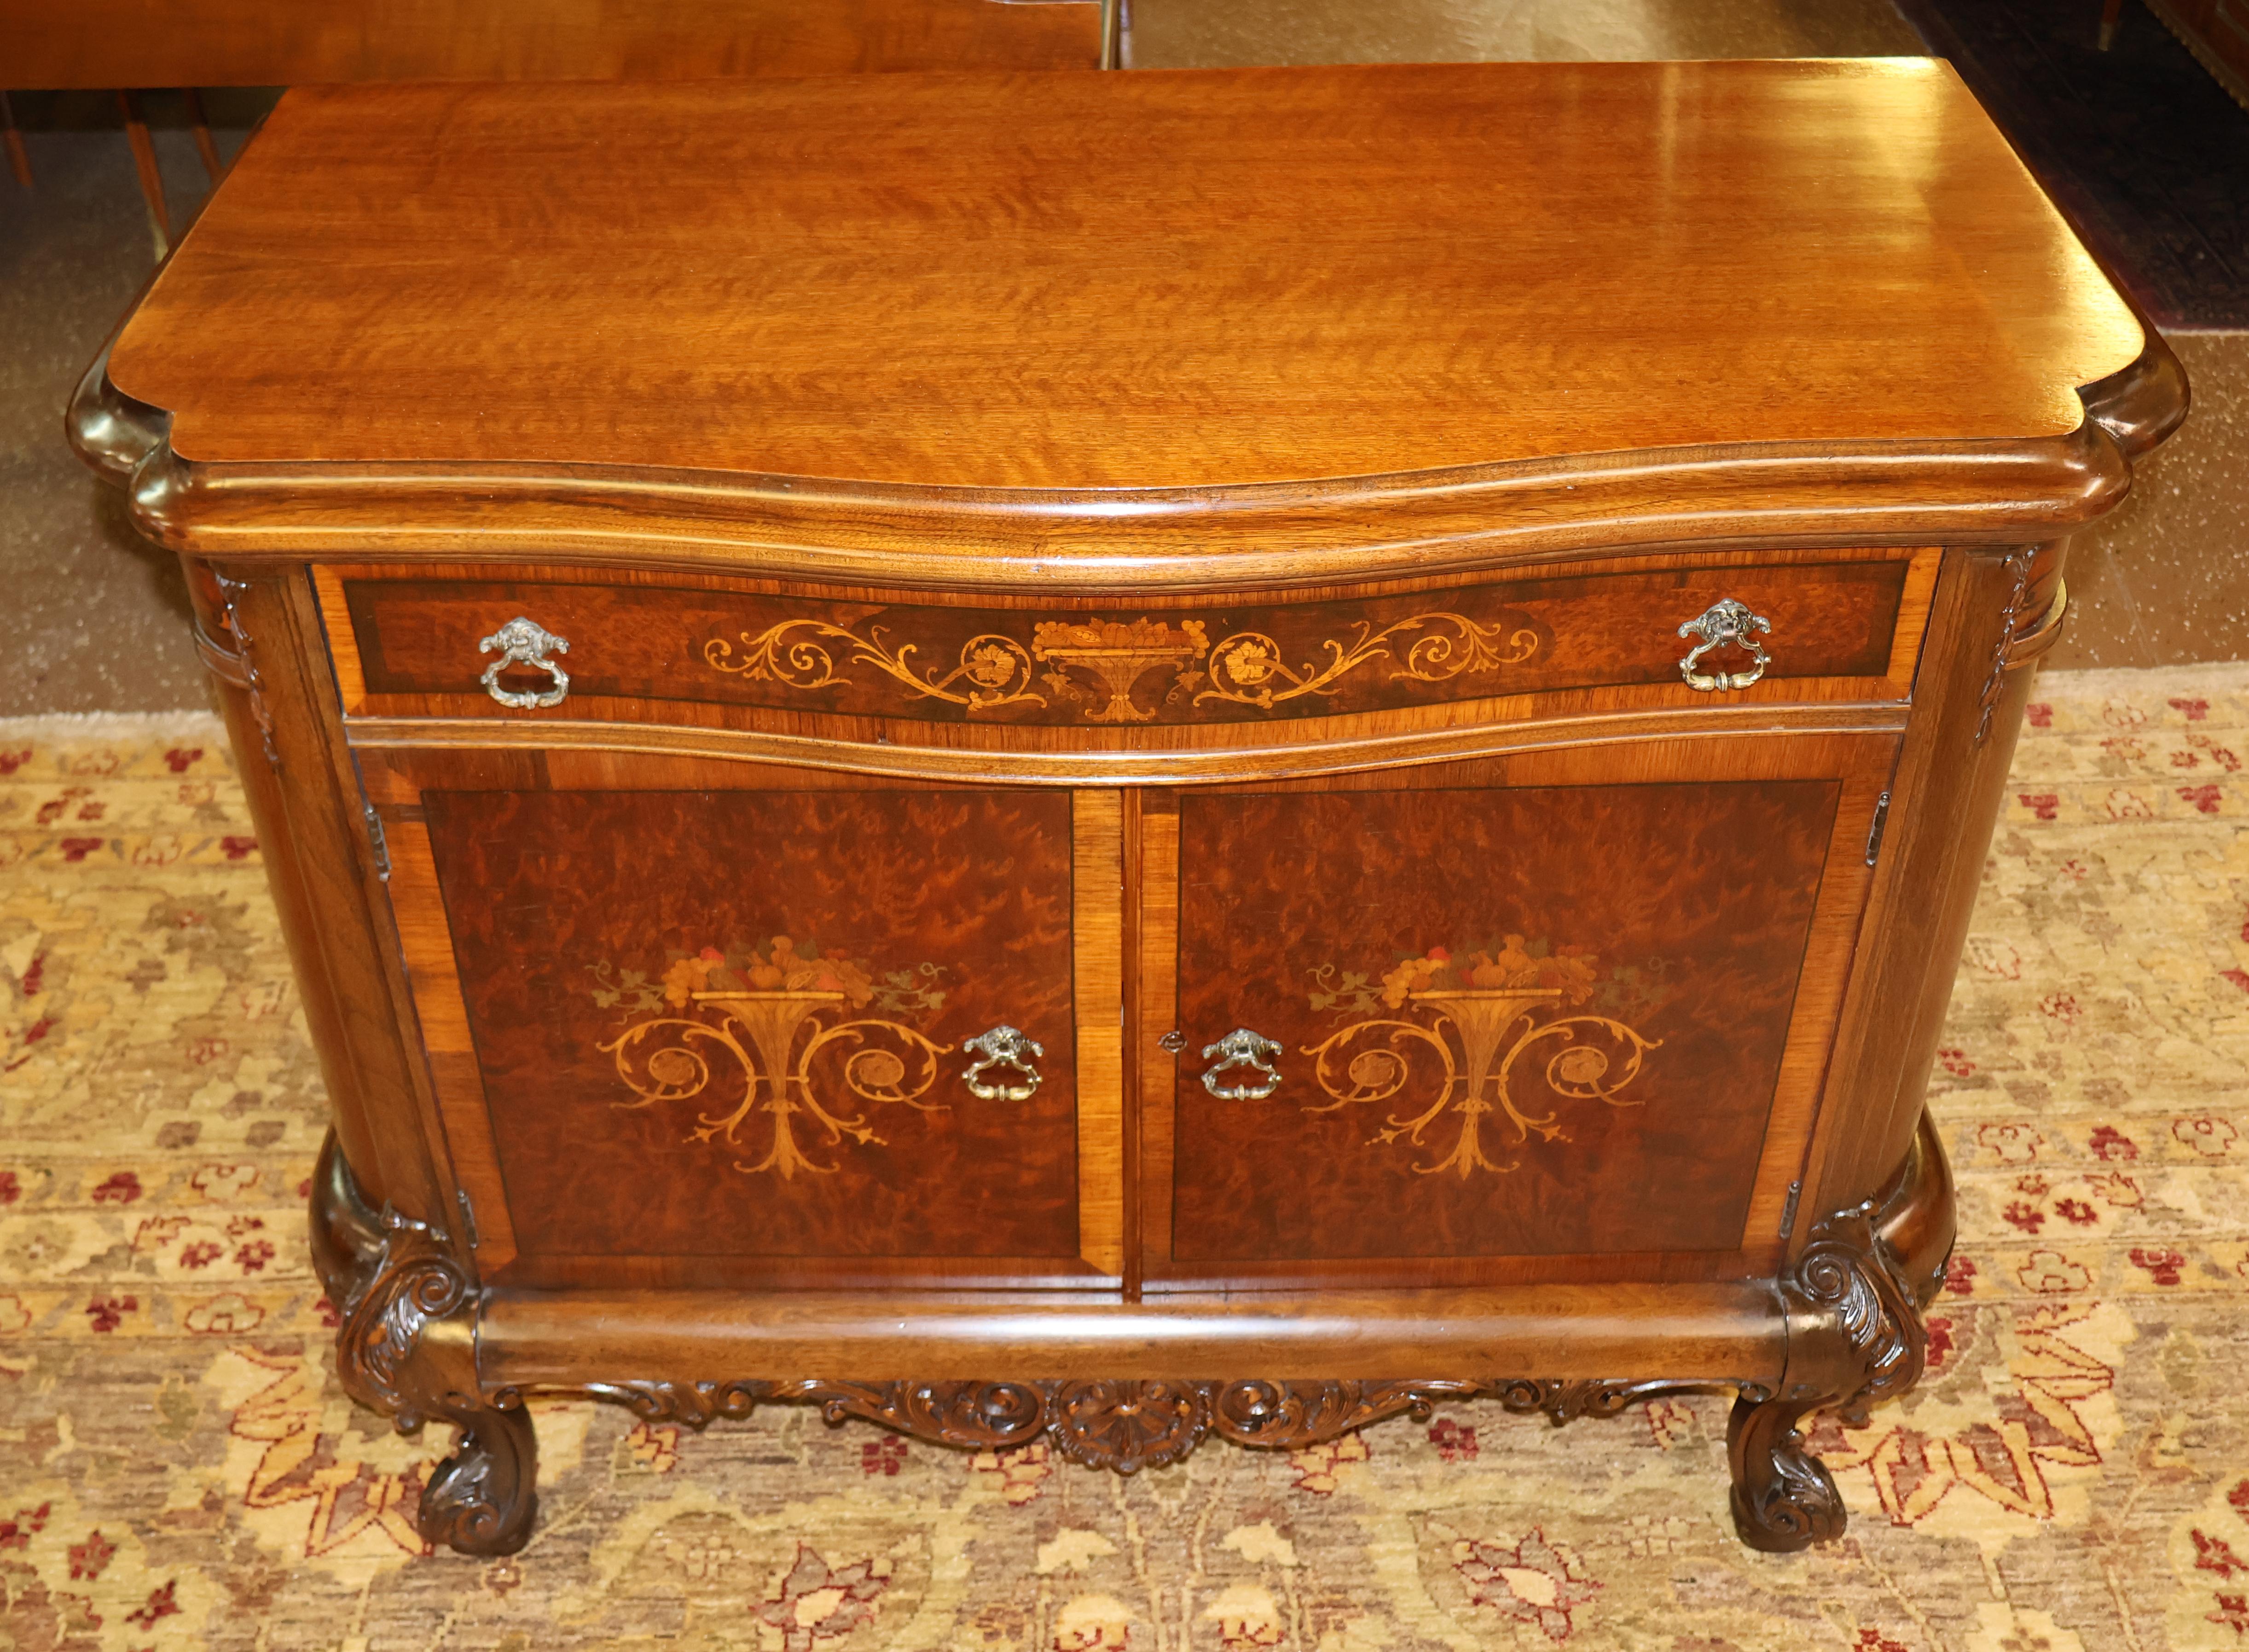 1920's French Louis XV Style Walnut Inlaid Commode Chest Server By Rockford

Dimensions : 44